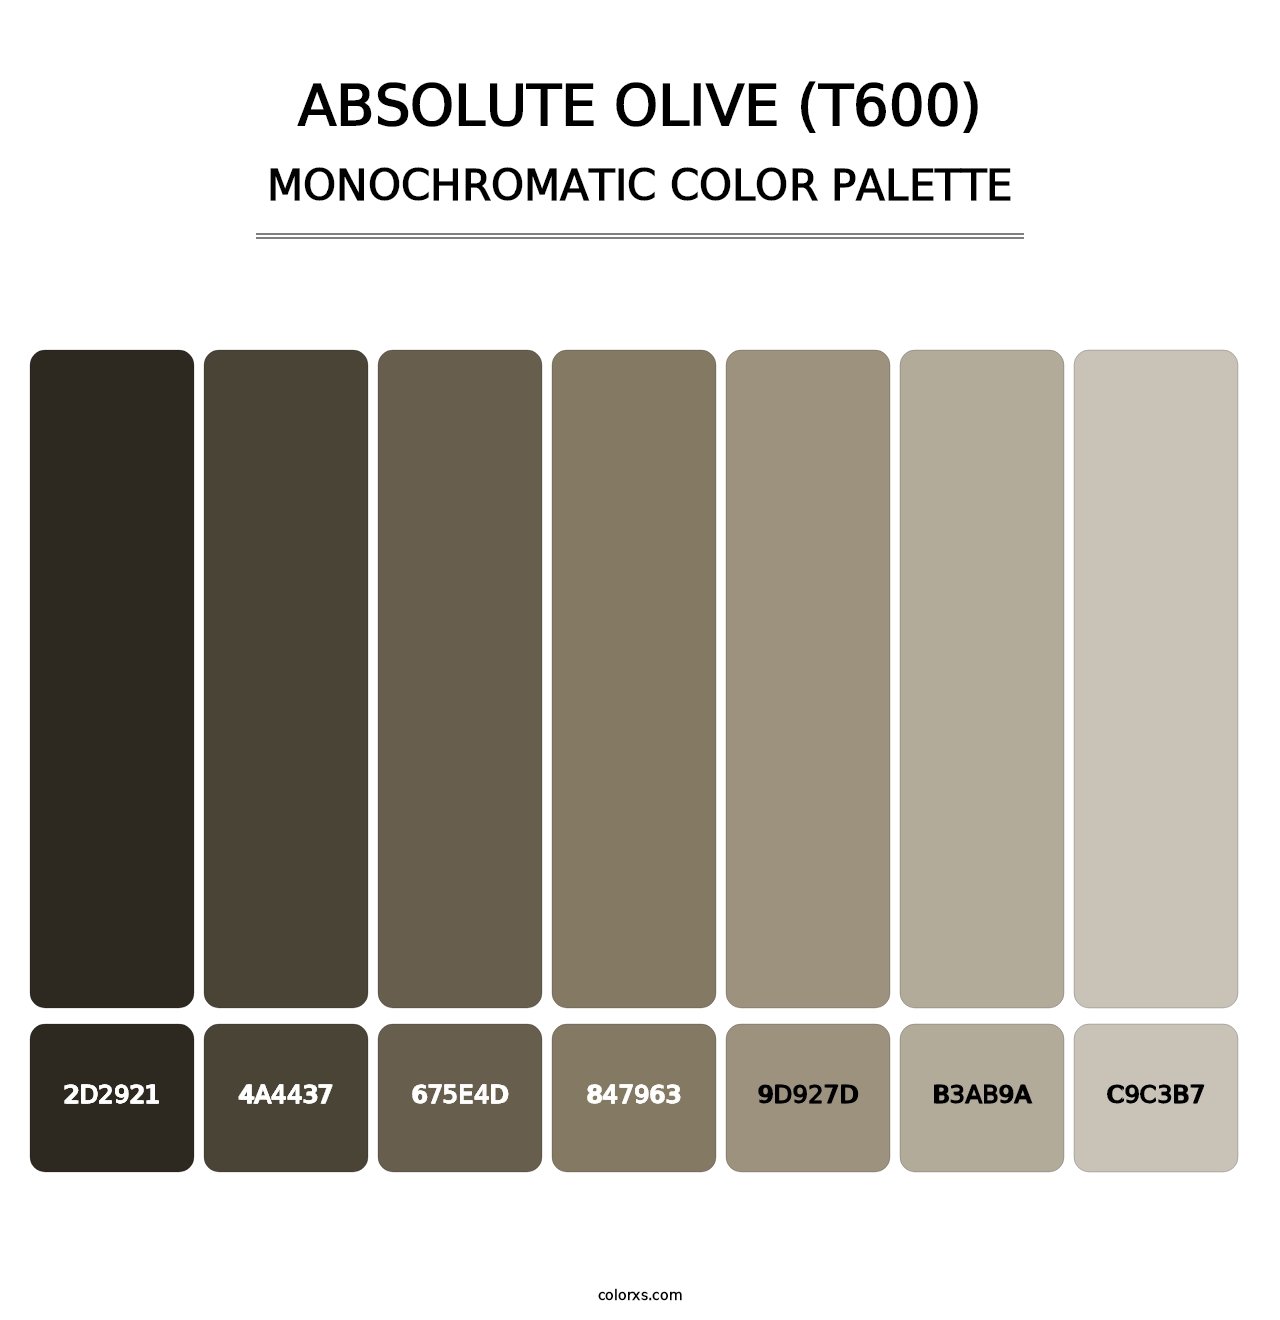 Absolute Olive (T600) - Monochromatic Color Palette